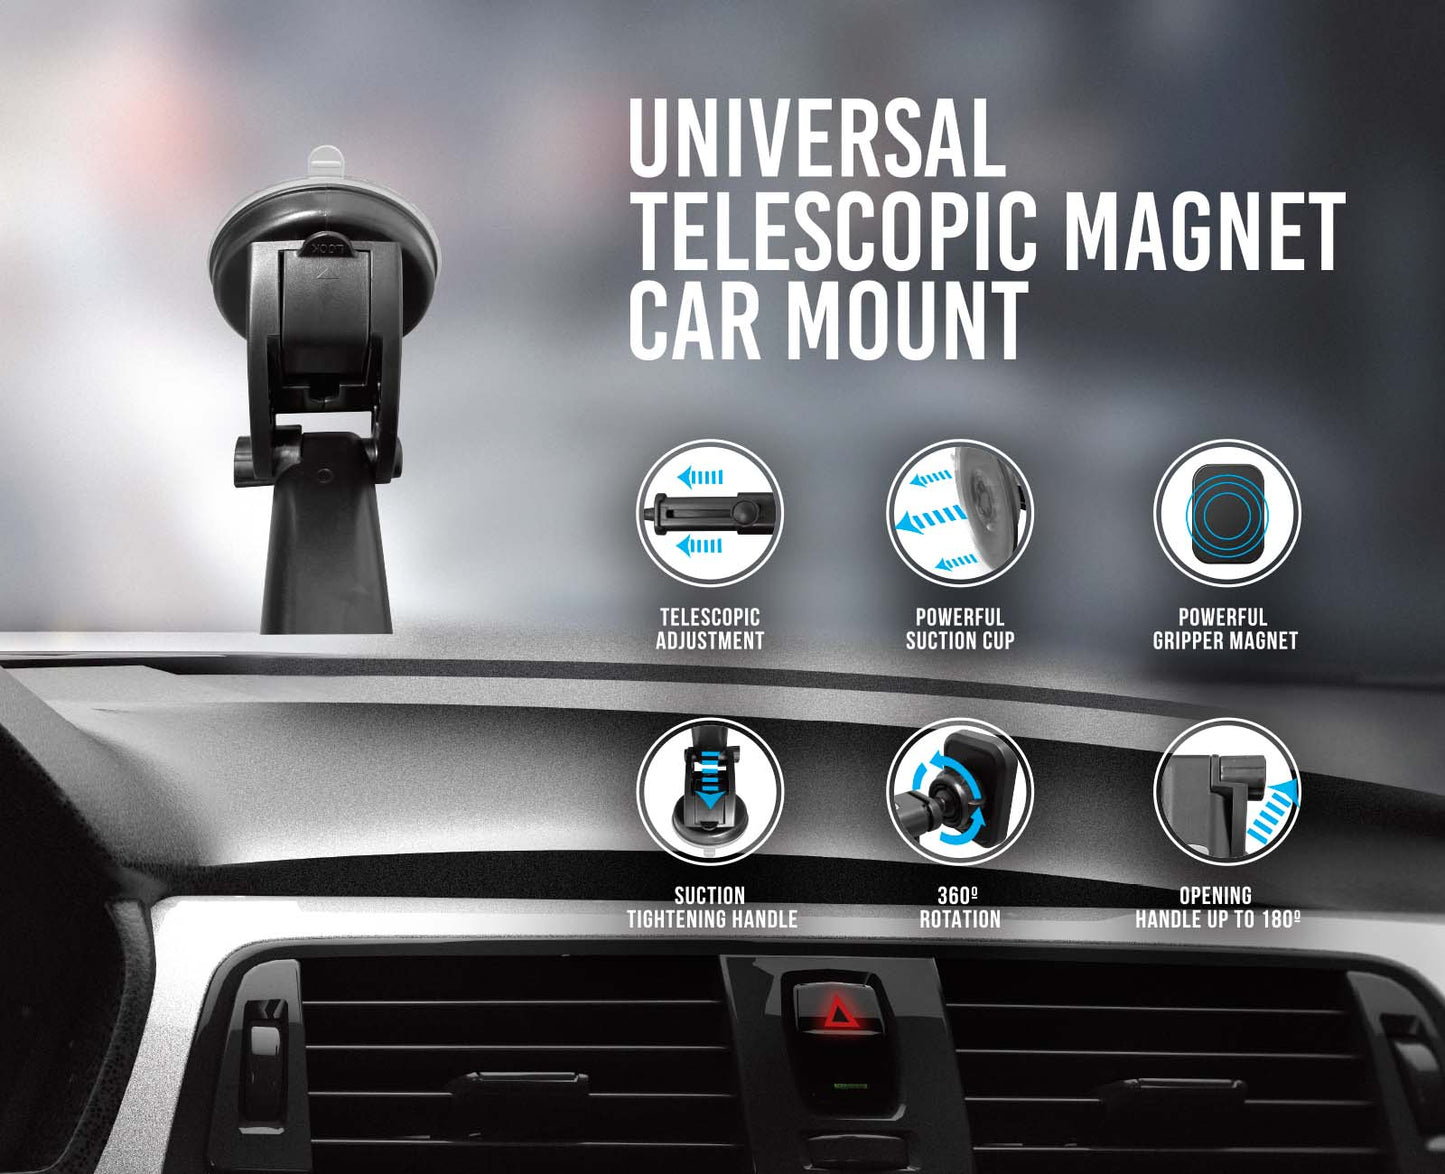 TOPTECH Universal Telescopic Magnetic Car Mount Holder OL, Secure & Hands-Free Driving Solution for Phones and GPS Devices, 360° Rotation Adjustable Arm Fits Any Vehicle Dashboard, Easy Installation